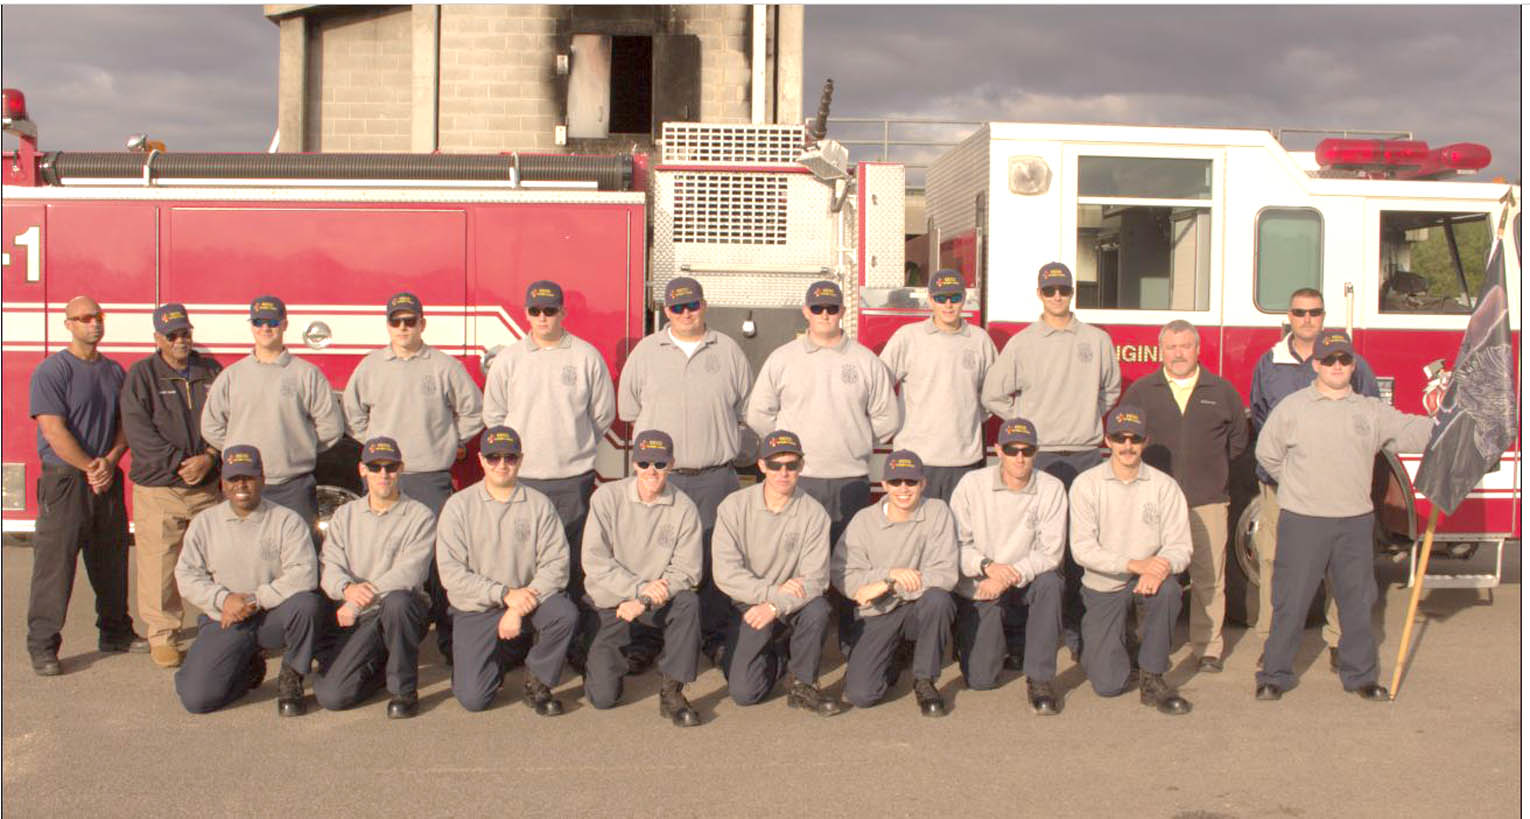 Read the full story, CCCC's Fire Academy holds graduation